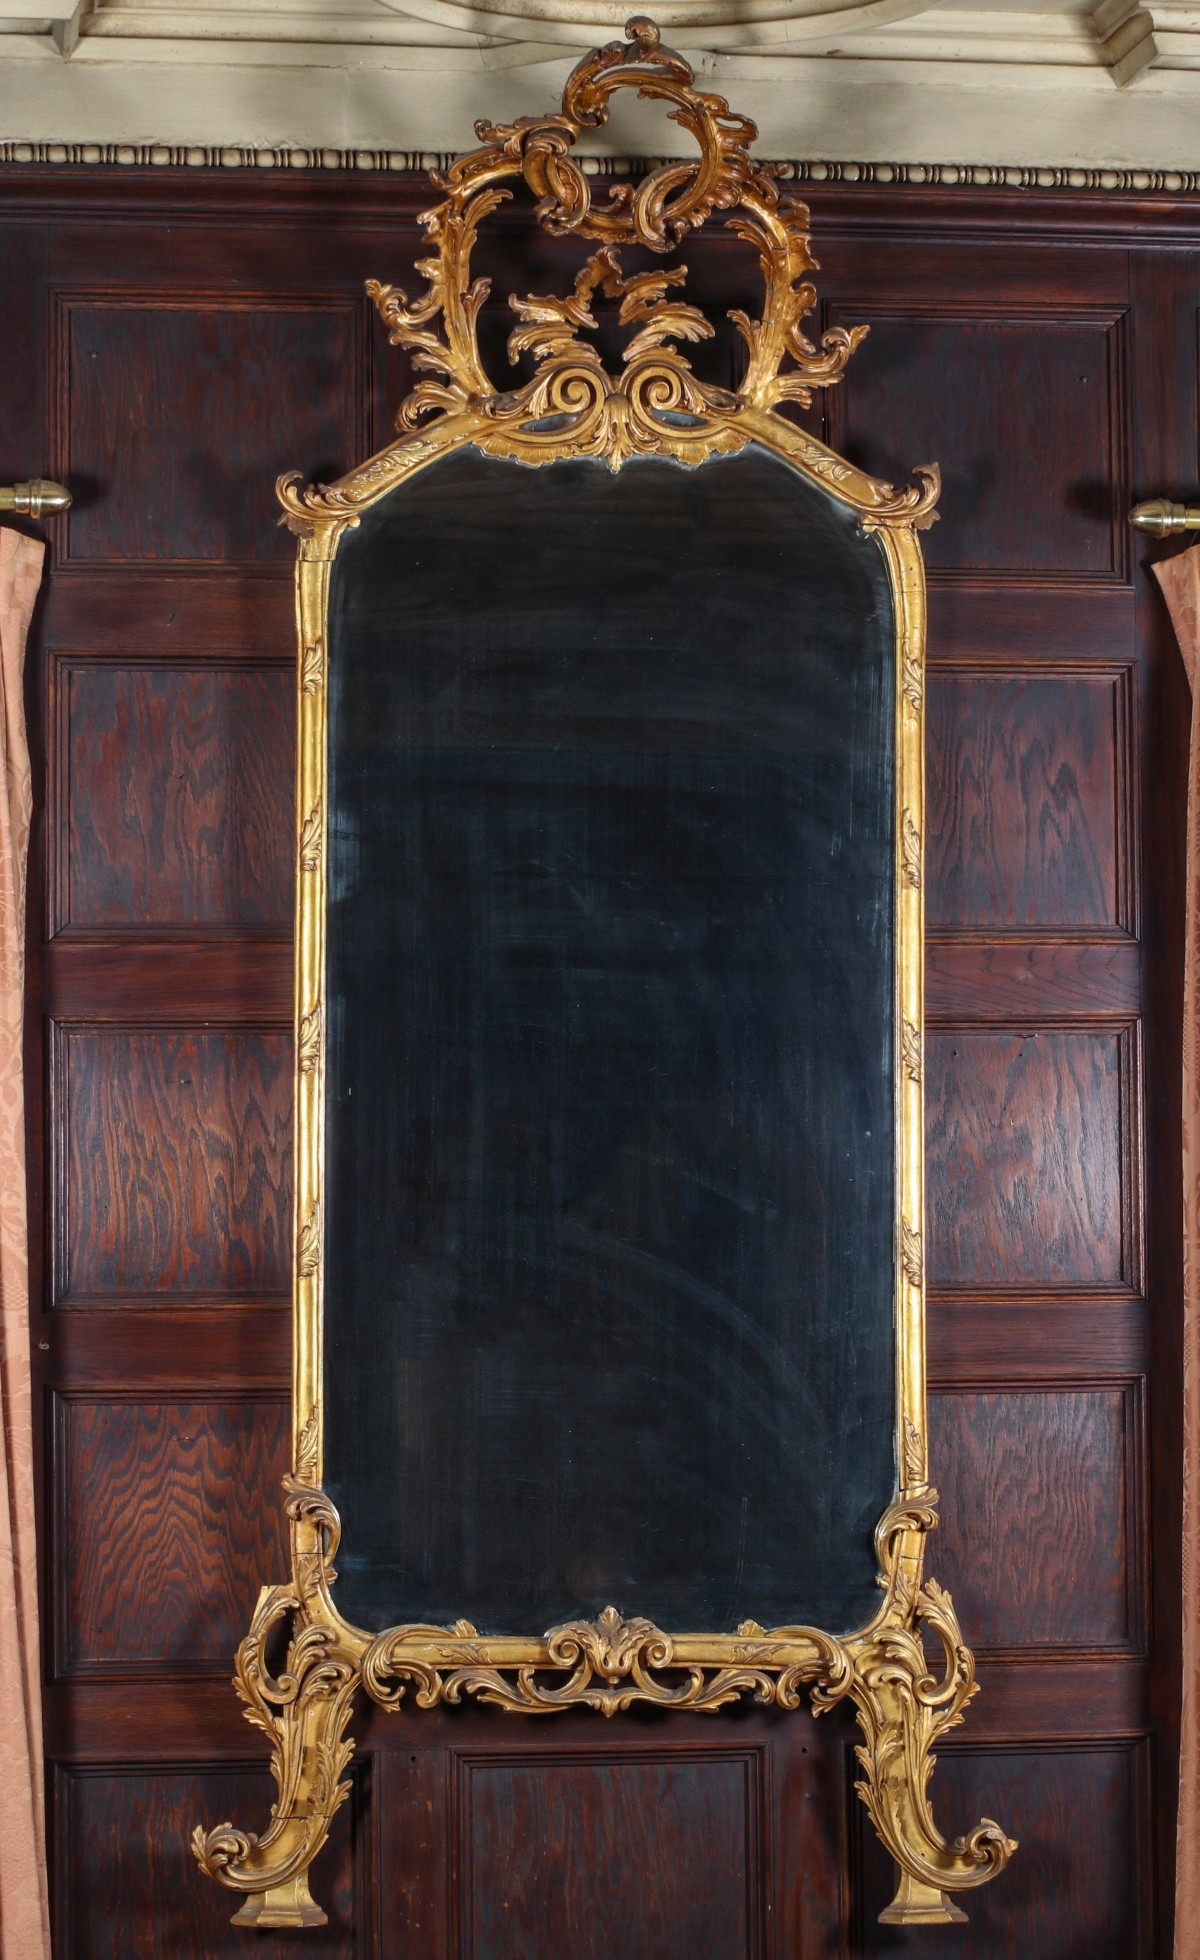 AN EARLY TO MID 19TH CENTURY FRENCH ROCOCO MIRROR